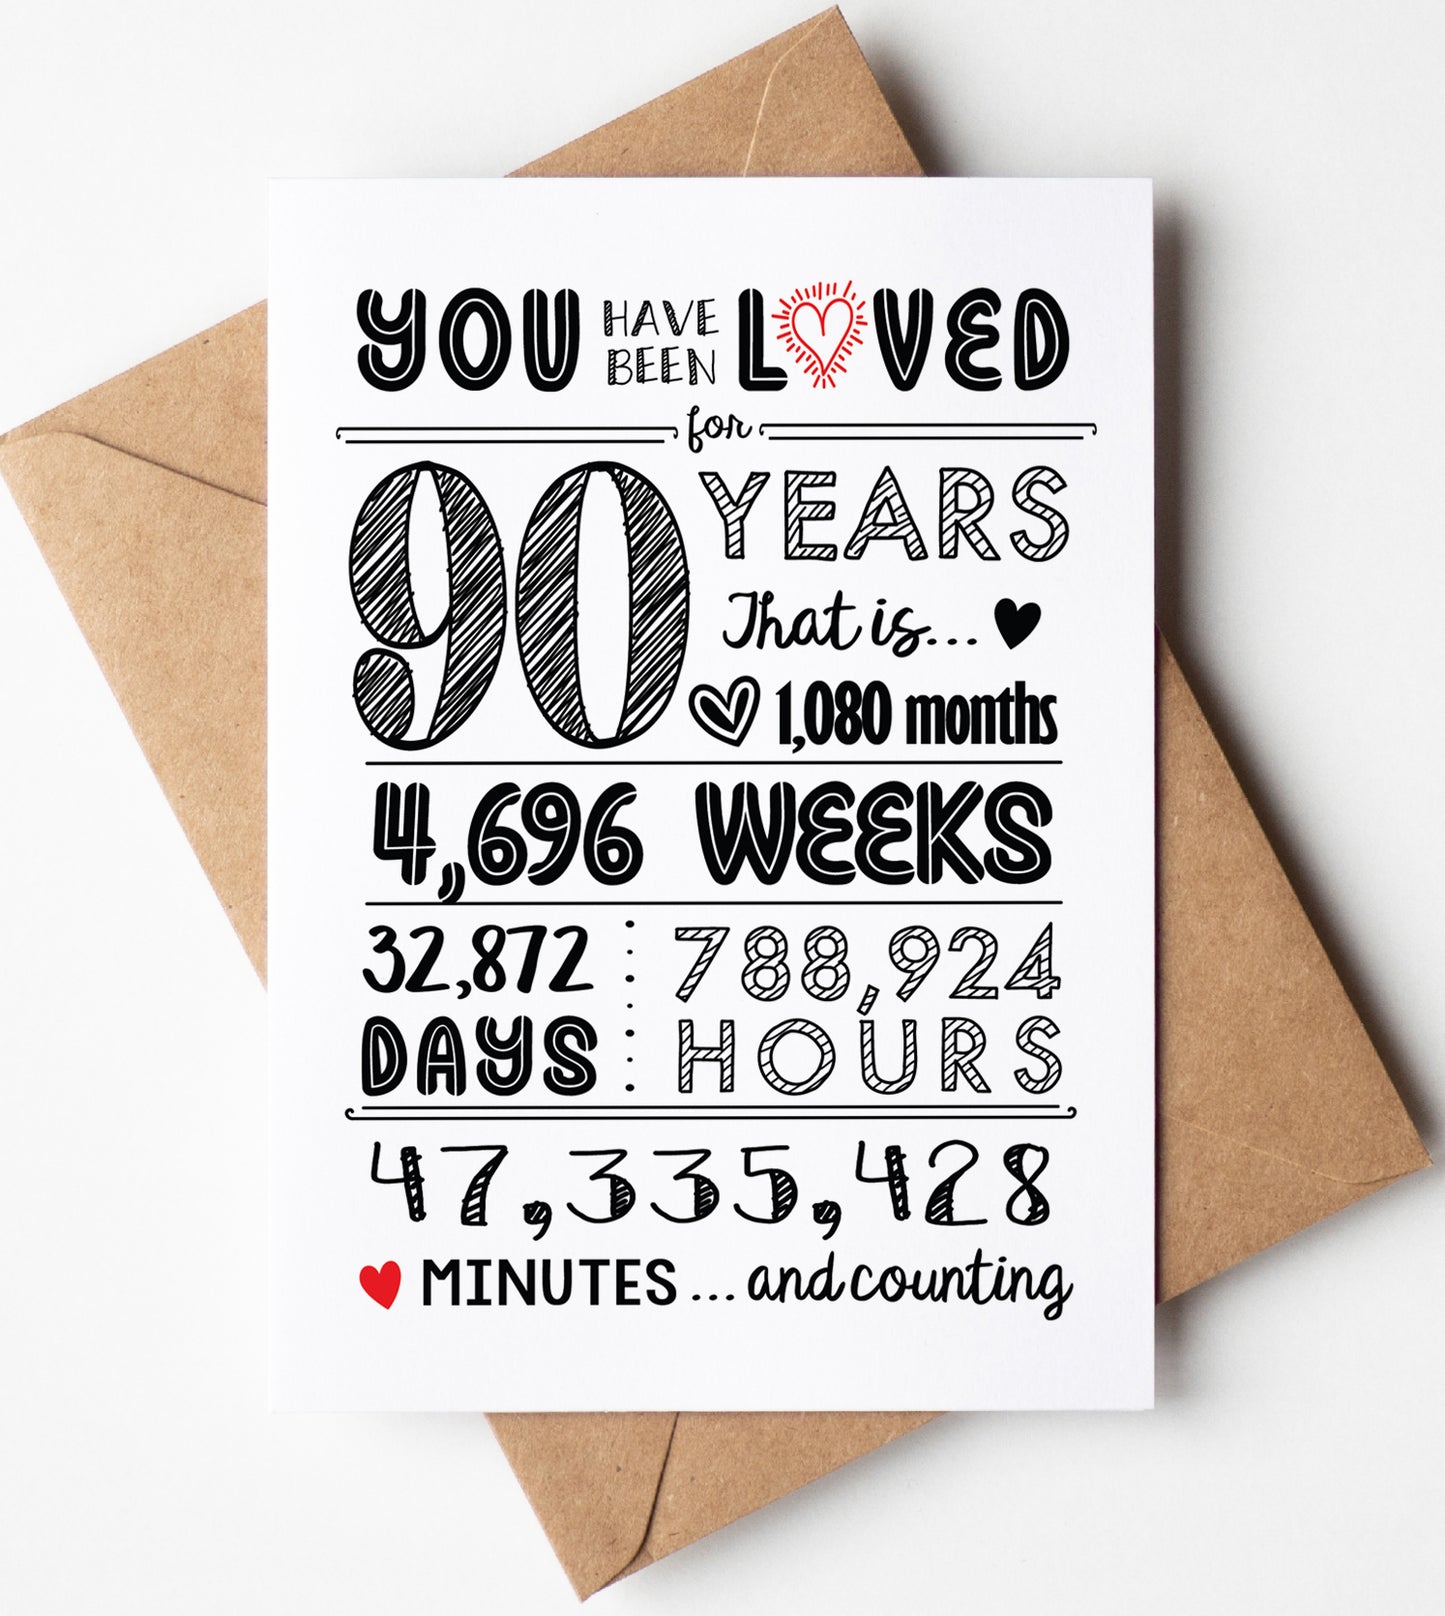 90th Birthday Card (90 Years Loved) with Envelope